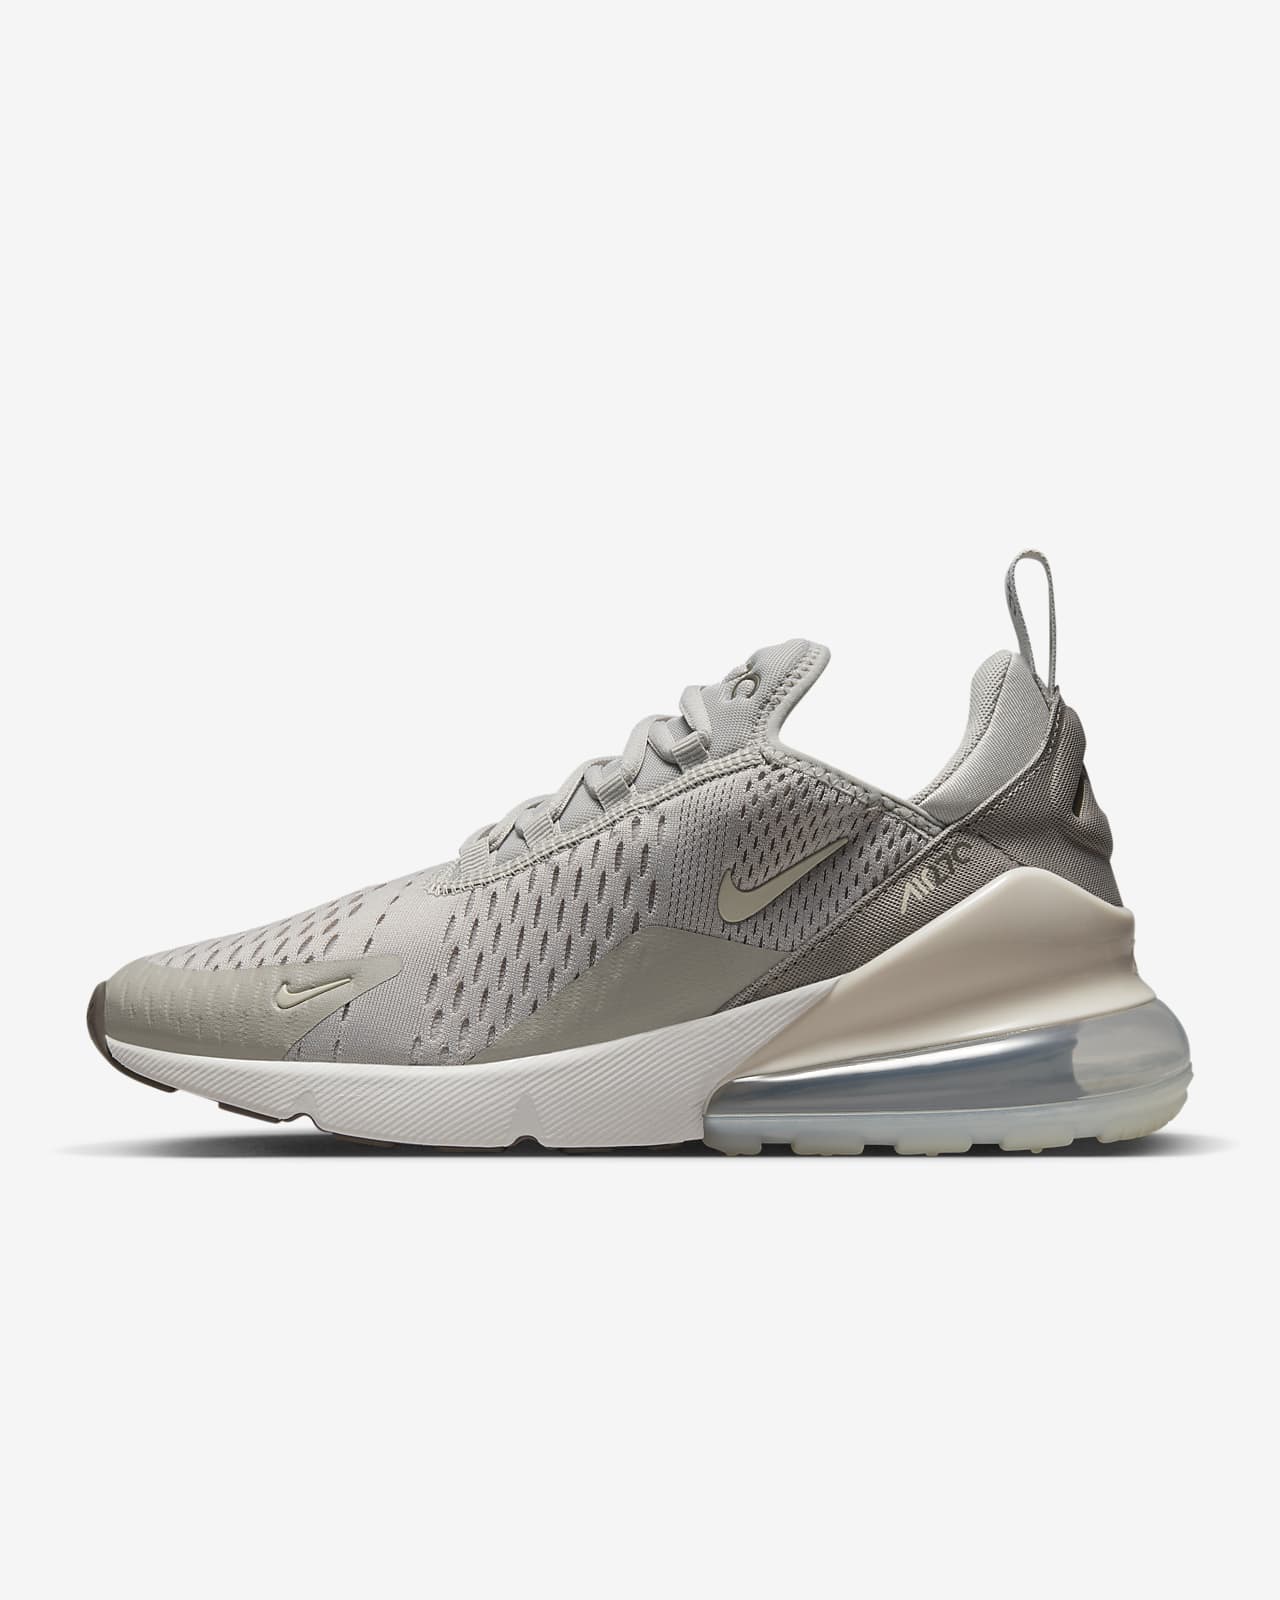 Chaussure Nike Max pour femme. Nike FR